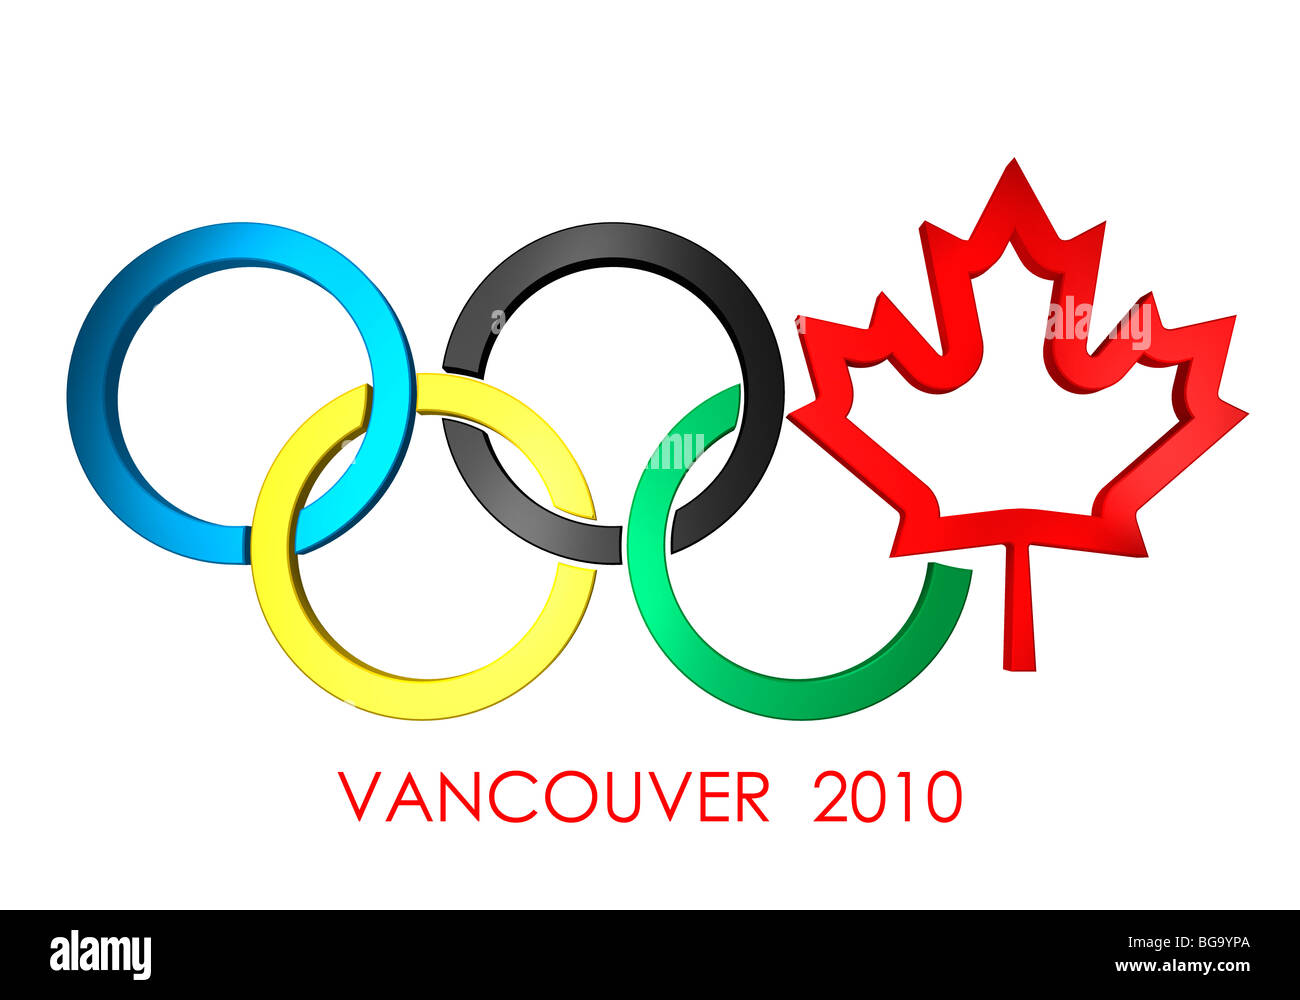 Olympic rings Vancouver 2010 concept with a Canada maple leaf symbol. Isolated on white background. Stock Photo